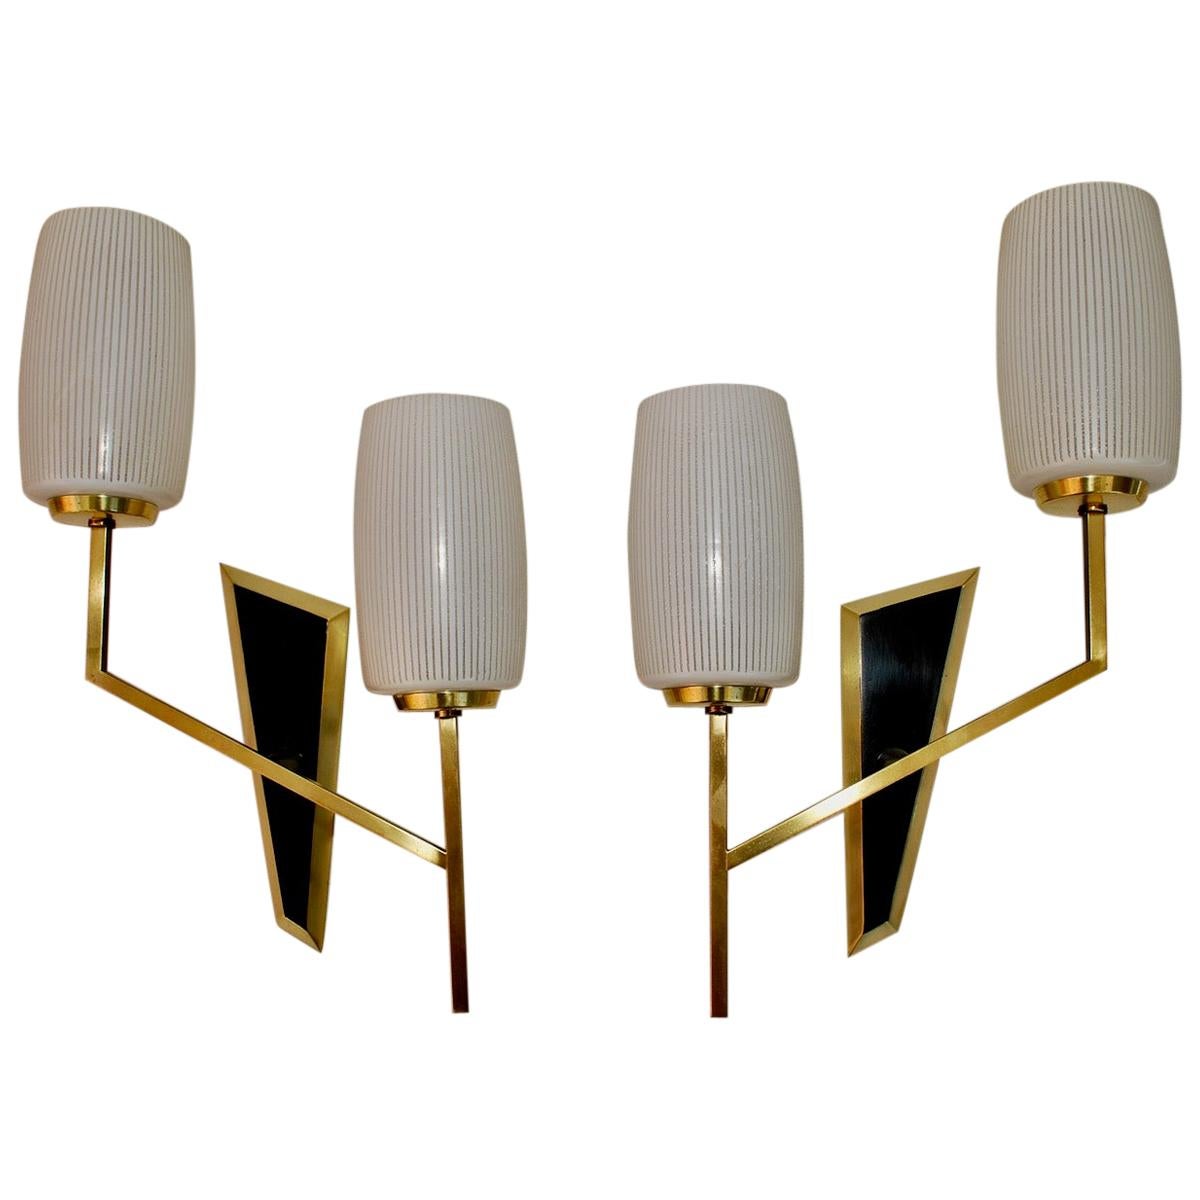 Beautiful Pair of Midcentury French Sconces Design by Maison Arlus